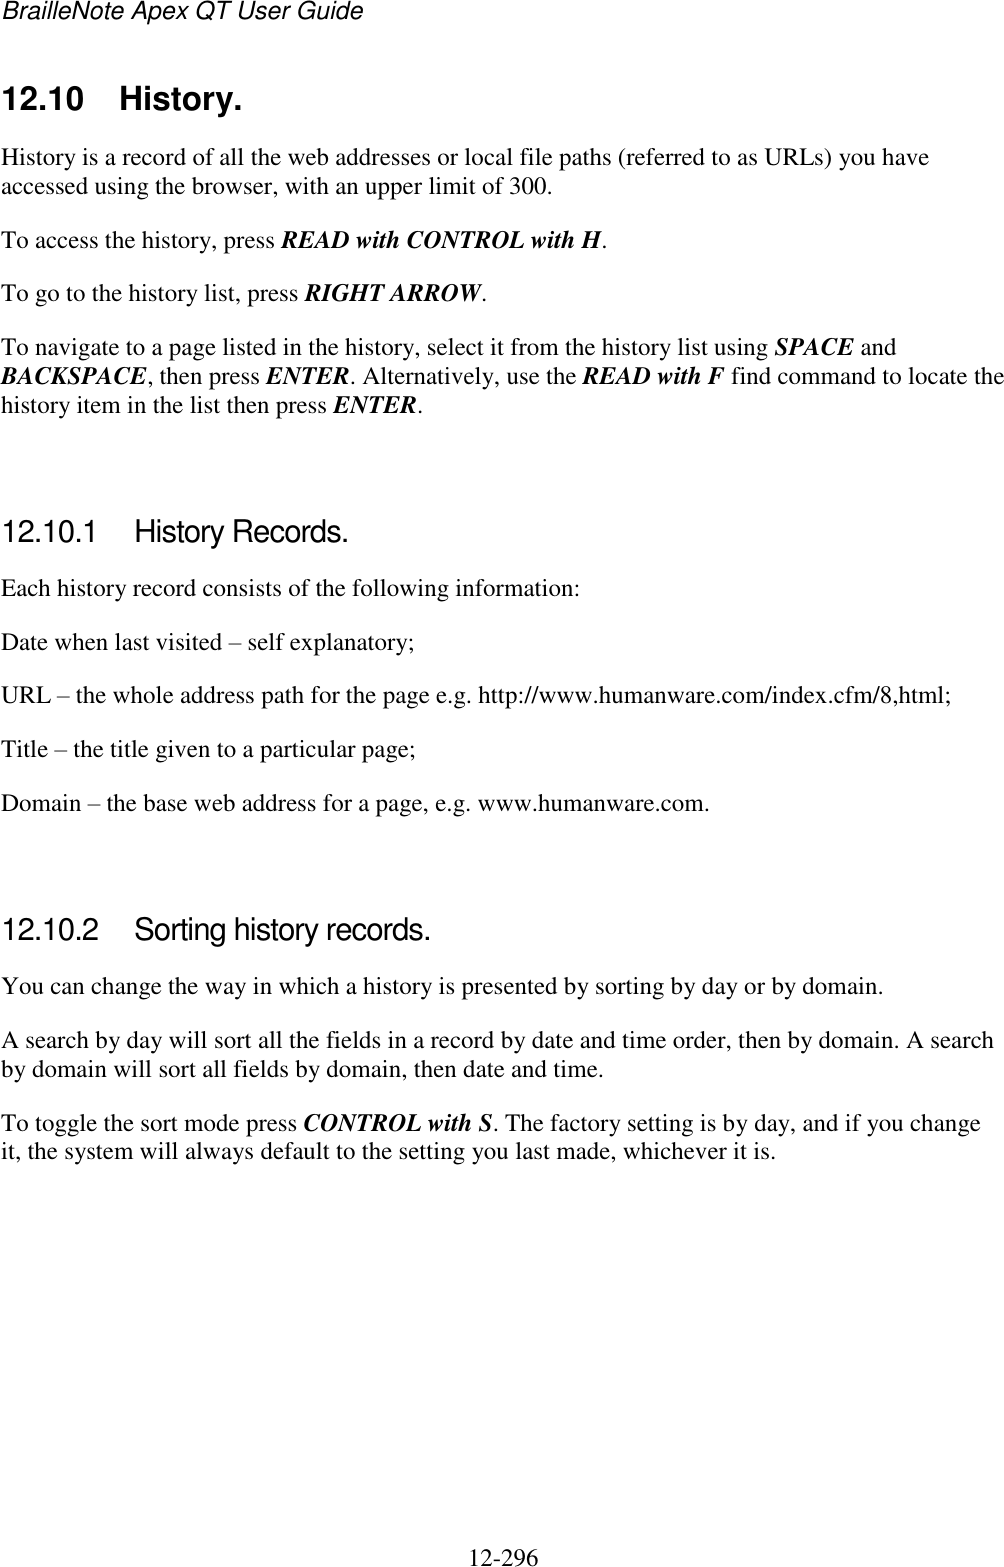 BrailleNote Apex QT User Guide  12-296   12.10  History. History is a record of all the web addresses or local file paths (referred to as URLs) you have accessed using the browser, with an upper limit of 300. To access the history, press READ with CONTROL with H. To go to the history list, press RIGHT ARROW. To navigate to a page listed in the history, select it from the history list using SPACE and BACKSPACE, then press ENTER. Alternatively, use the READ with F find command to locate the history item in the list then press ENTER.   12.10.1  History Records. Each history record consists of the following information: Date when last visited – self explanatory; URL – the whole address path for the page e.g. http://www.humanware.com/index.cfm/8,html; Title – the title given to a particular page; Domain – the base web address for a page, e.g. www.humanware.com.   12.10.2  Sorting history records. You can change the way in which a history is presented by sorting by day or by domain. A search by day will sort all the fields in a record by date and time order, then by domain. A search by domain will sort all fields by domain, then date and time. To toggle the sort mode press CONTROL with S. The factory setting is by day, and if you change it, the system will always default to the setting you last made, whichever it is.   